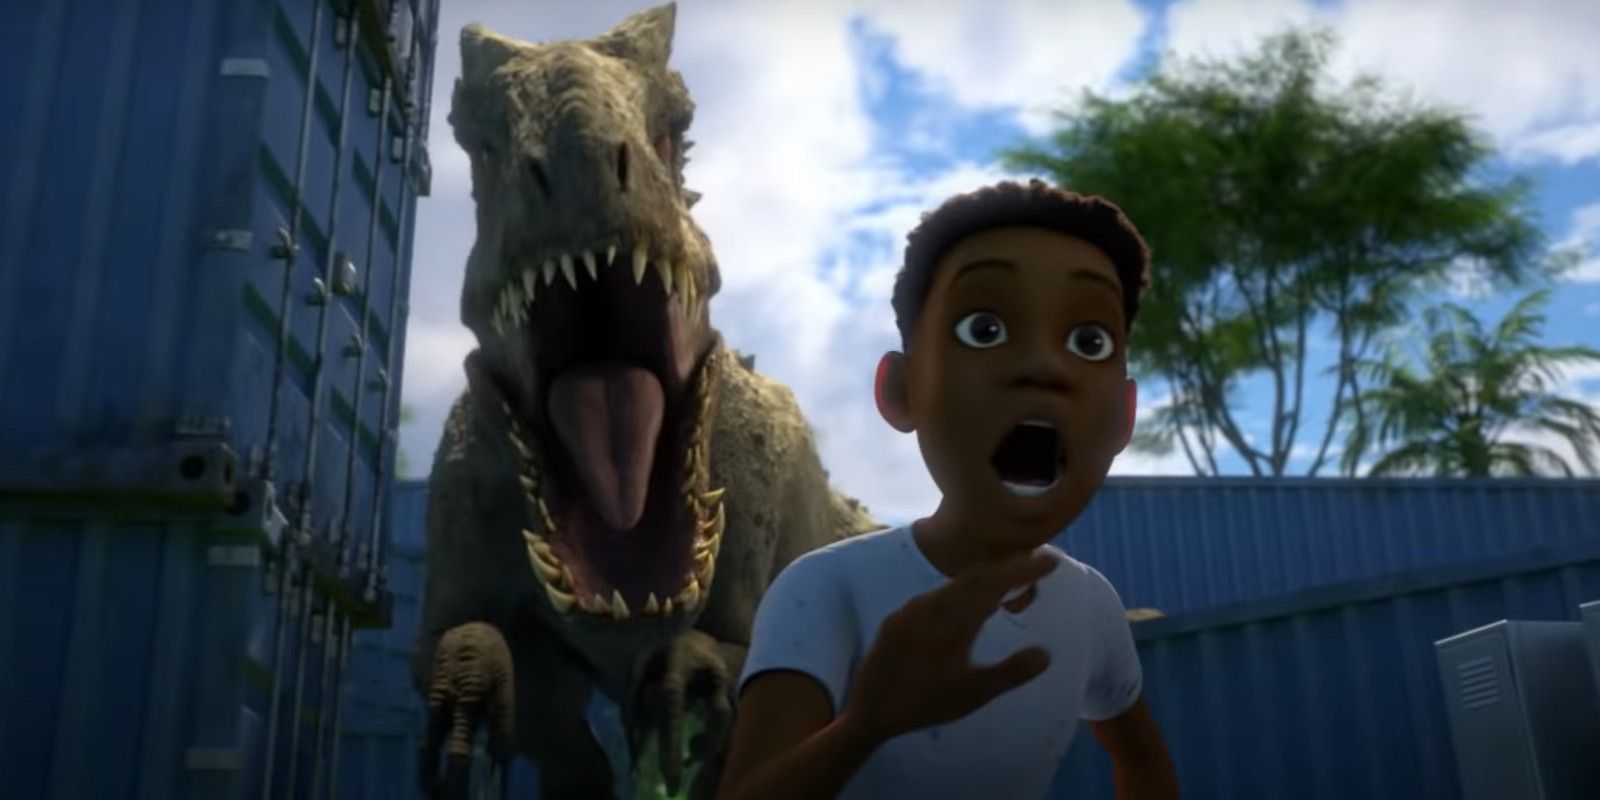 Jurassic World Camp Cretaceous Trailer Teases Events During 2015 Movie